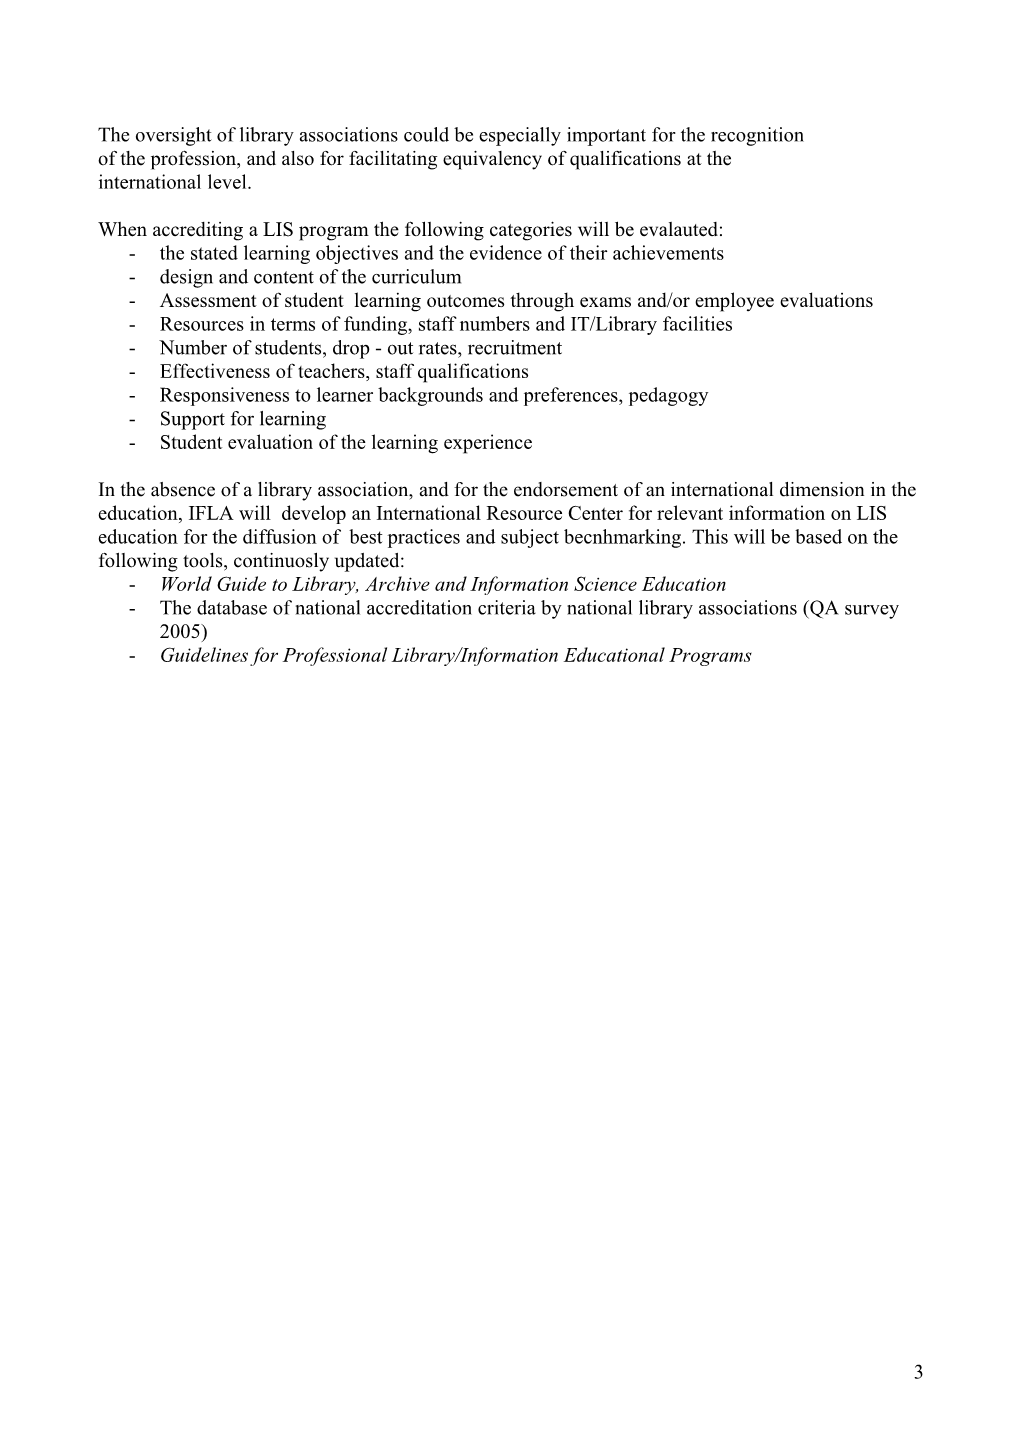 Guidance Document for Recognition of Qualifications